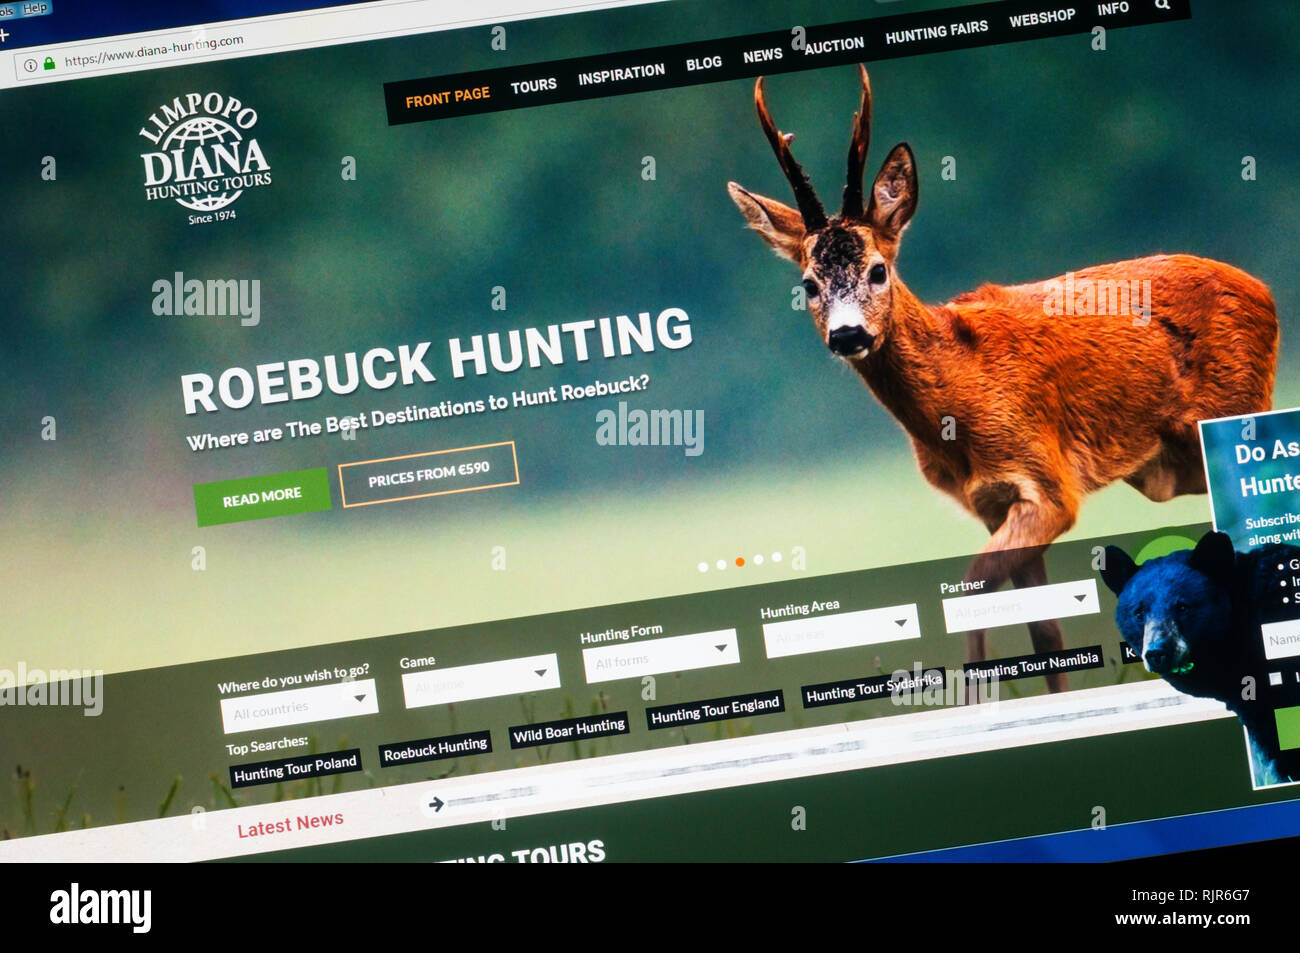 Home page of the website of Diana Hunting Tours promoting their roebuck hunting tours. Stock Photo